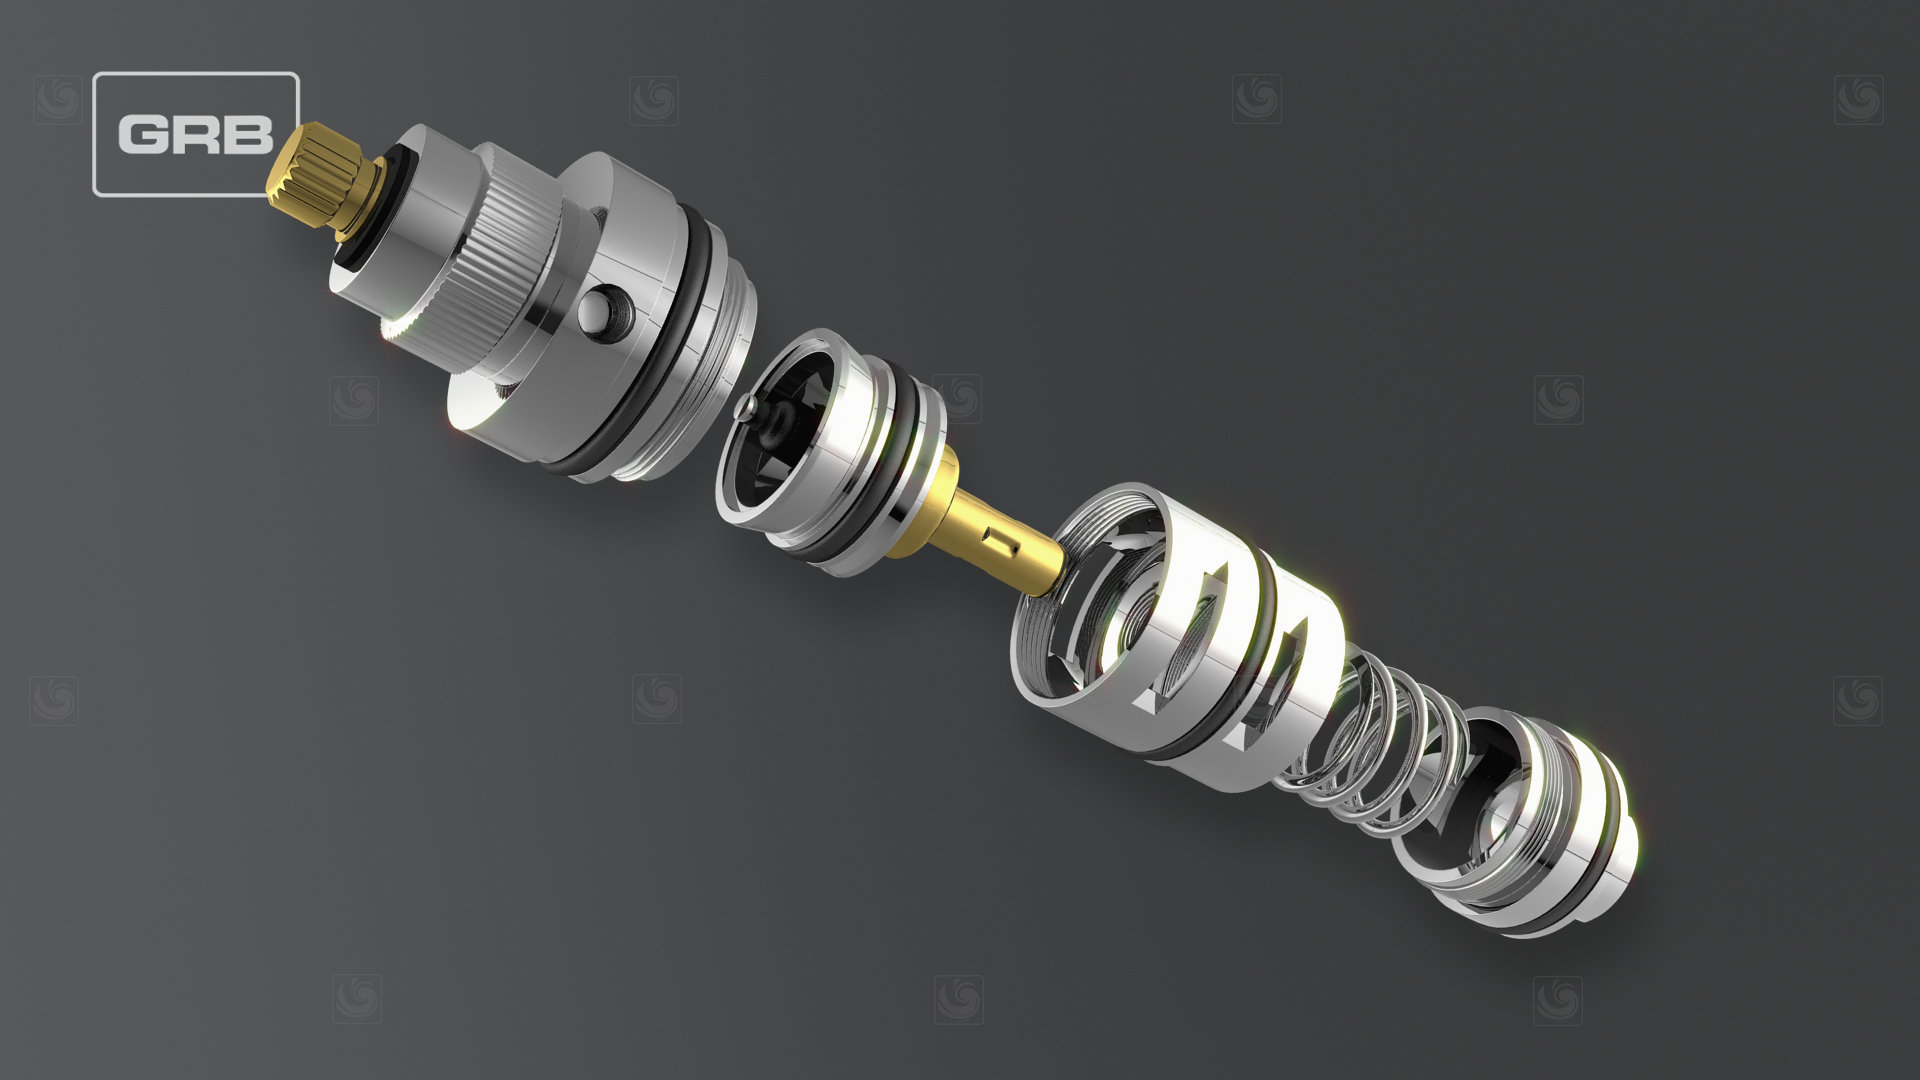 Photorealistic 3D animation frame showing the exploded view of a thermostatic mixing cartridge